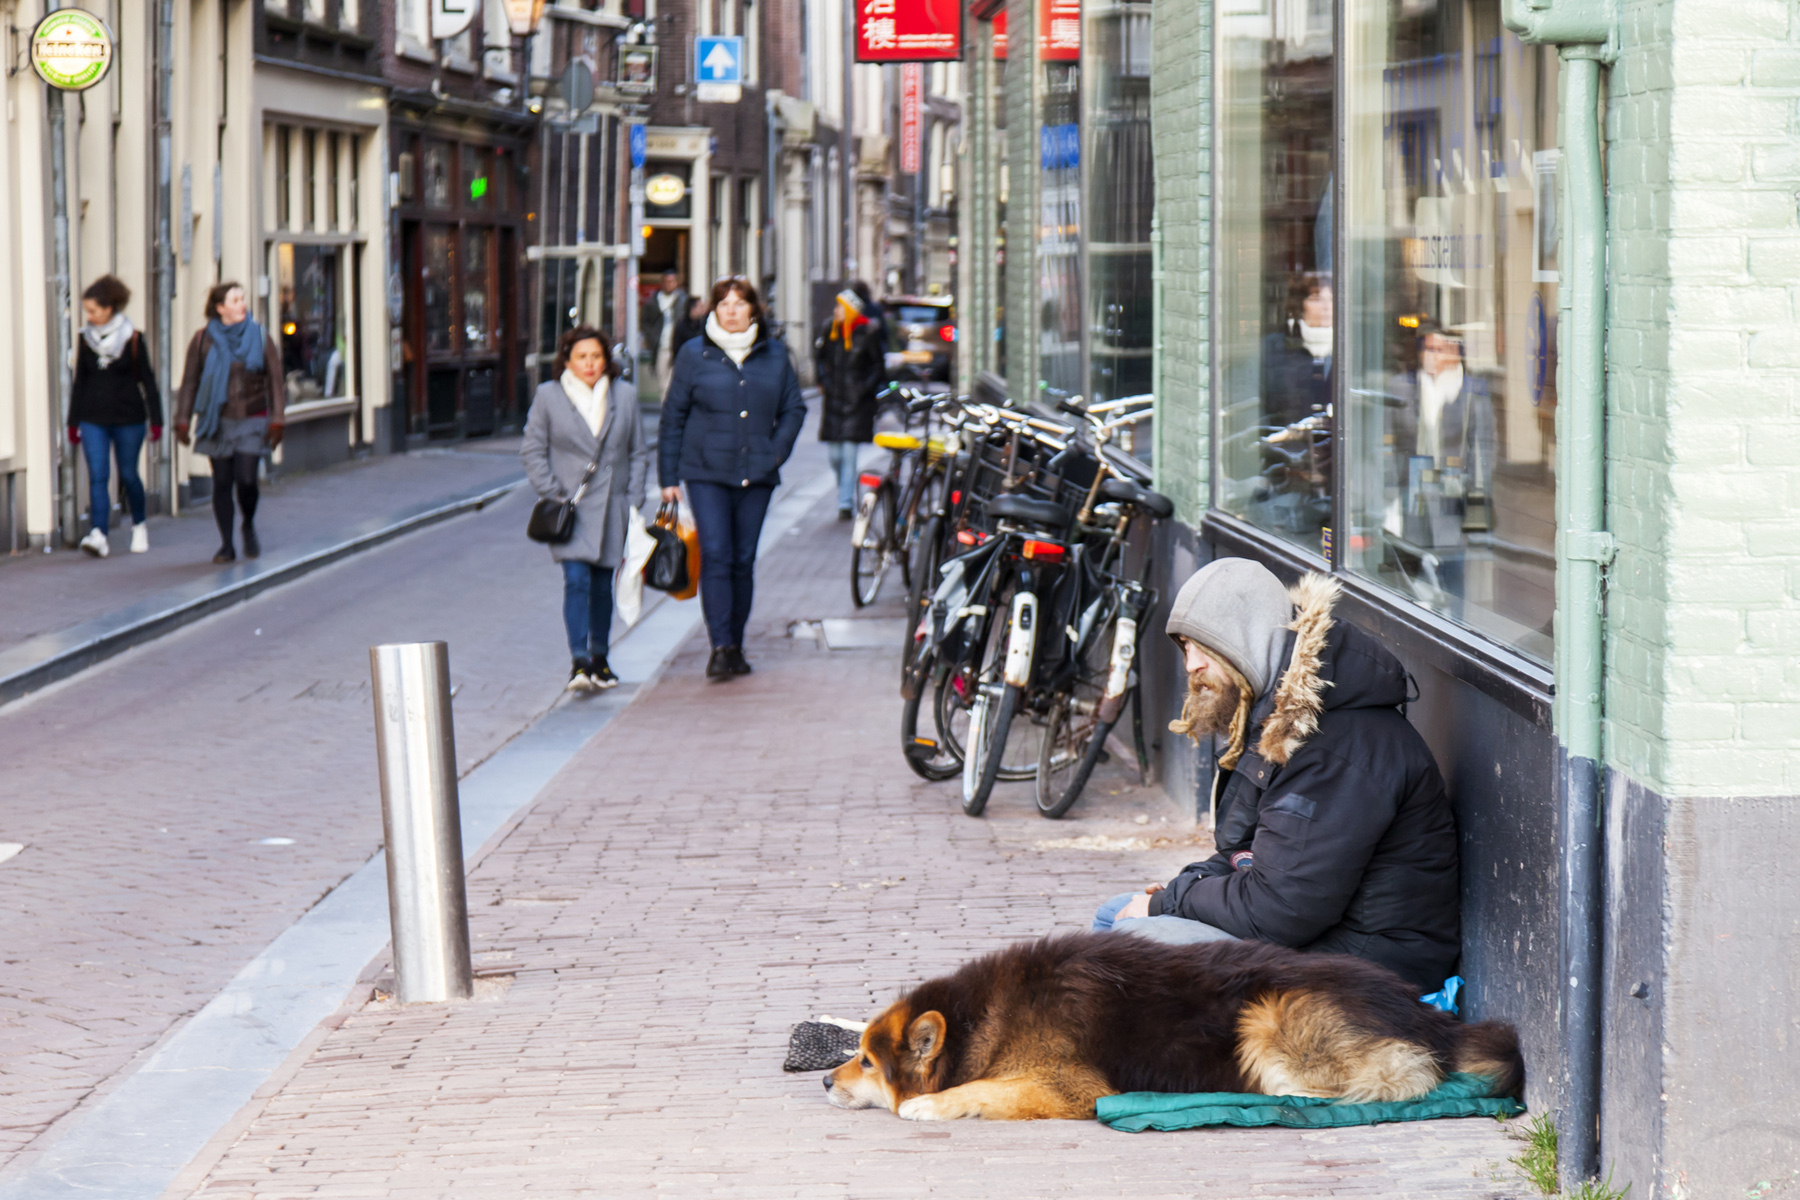 a homeless man with his dog in the street in Amsterdam